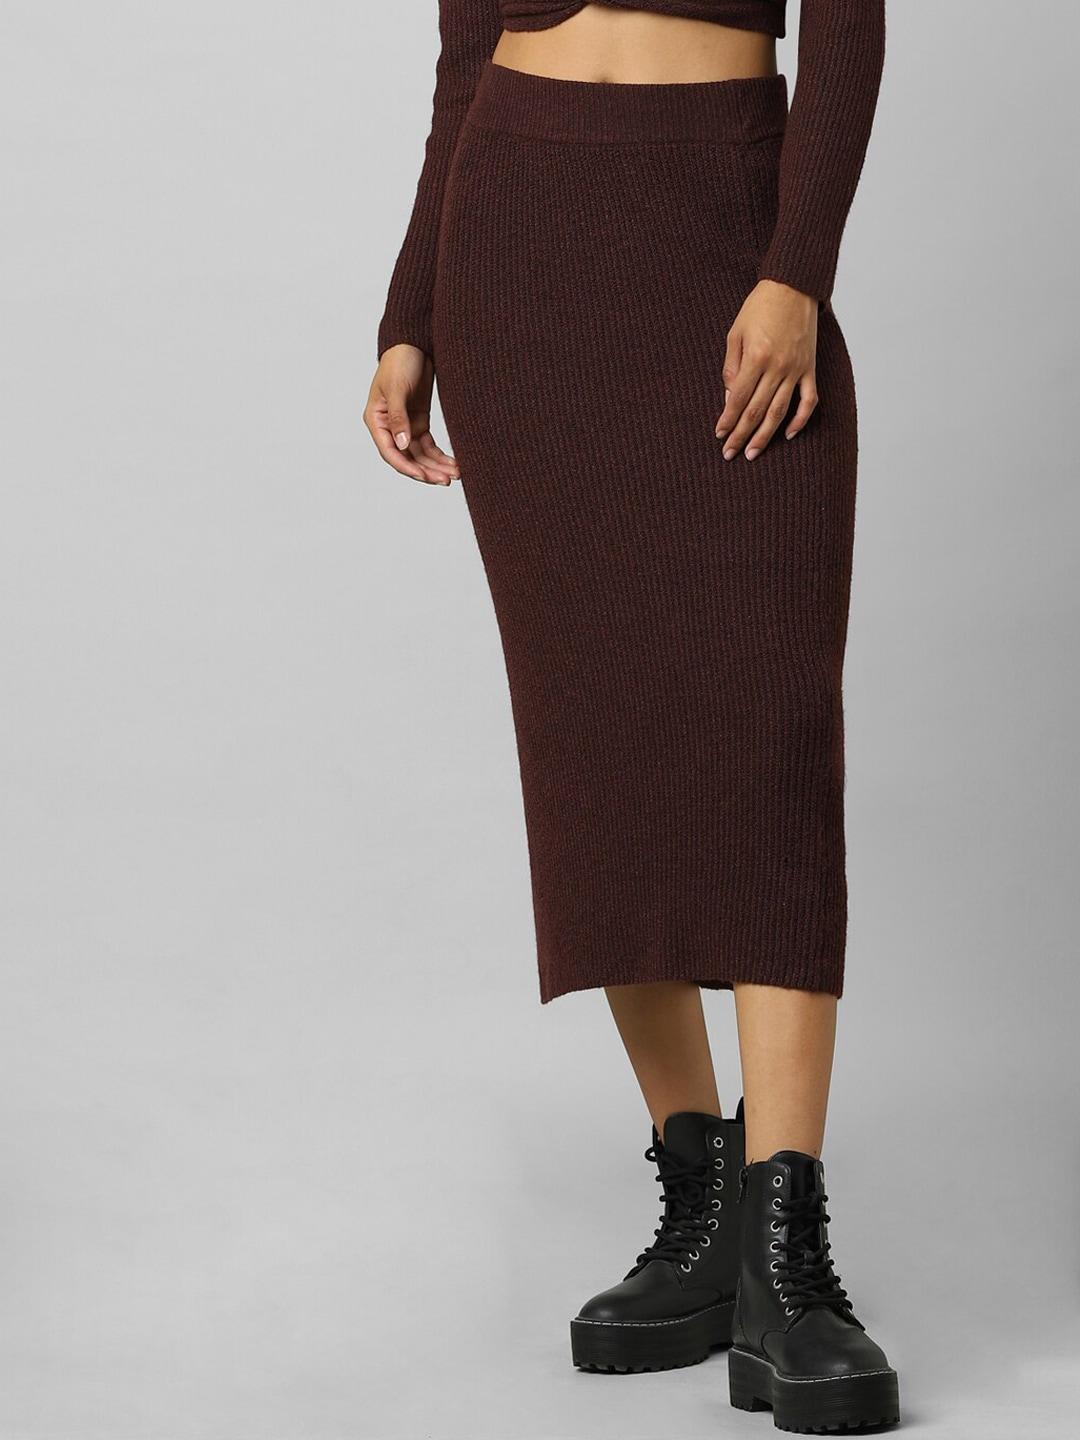 ONLY Women Burgundy Solid Pencil Skirt